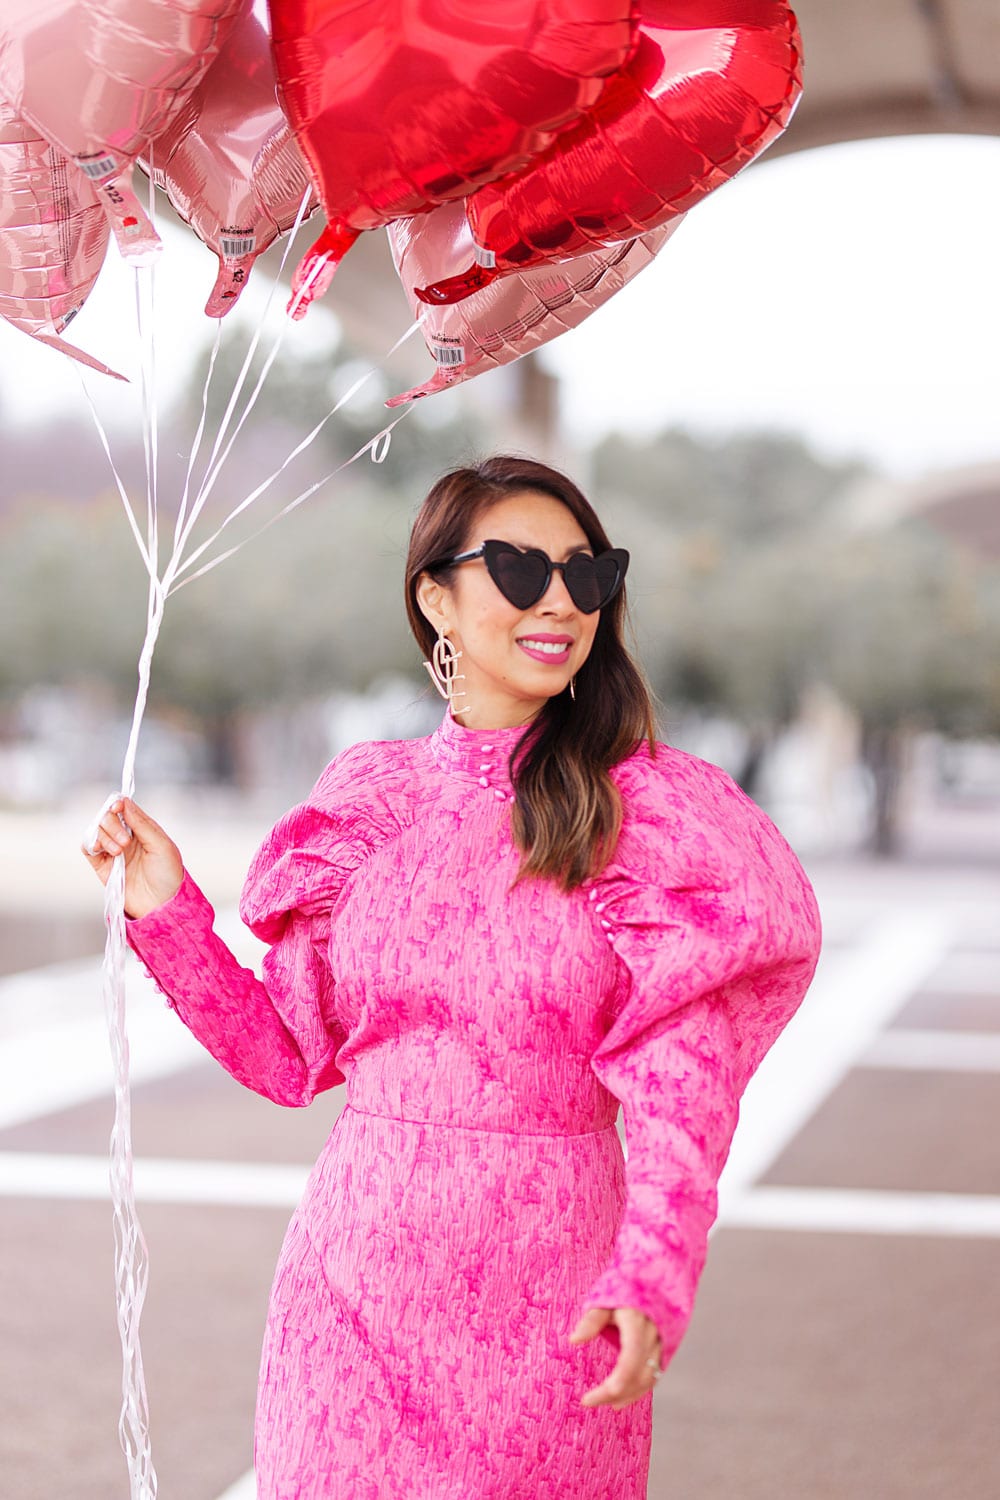 style of sam in rotate pink puff sleeve dress, heart sunglasses, love drop statement earrings